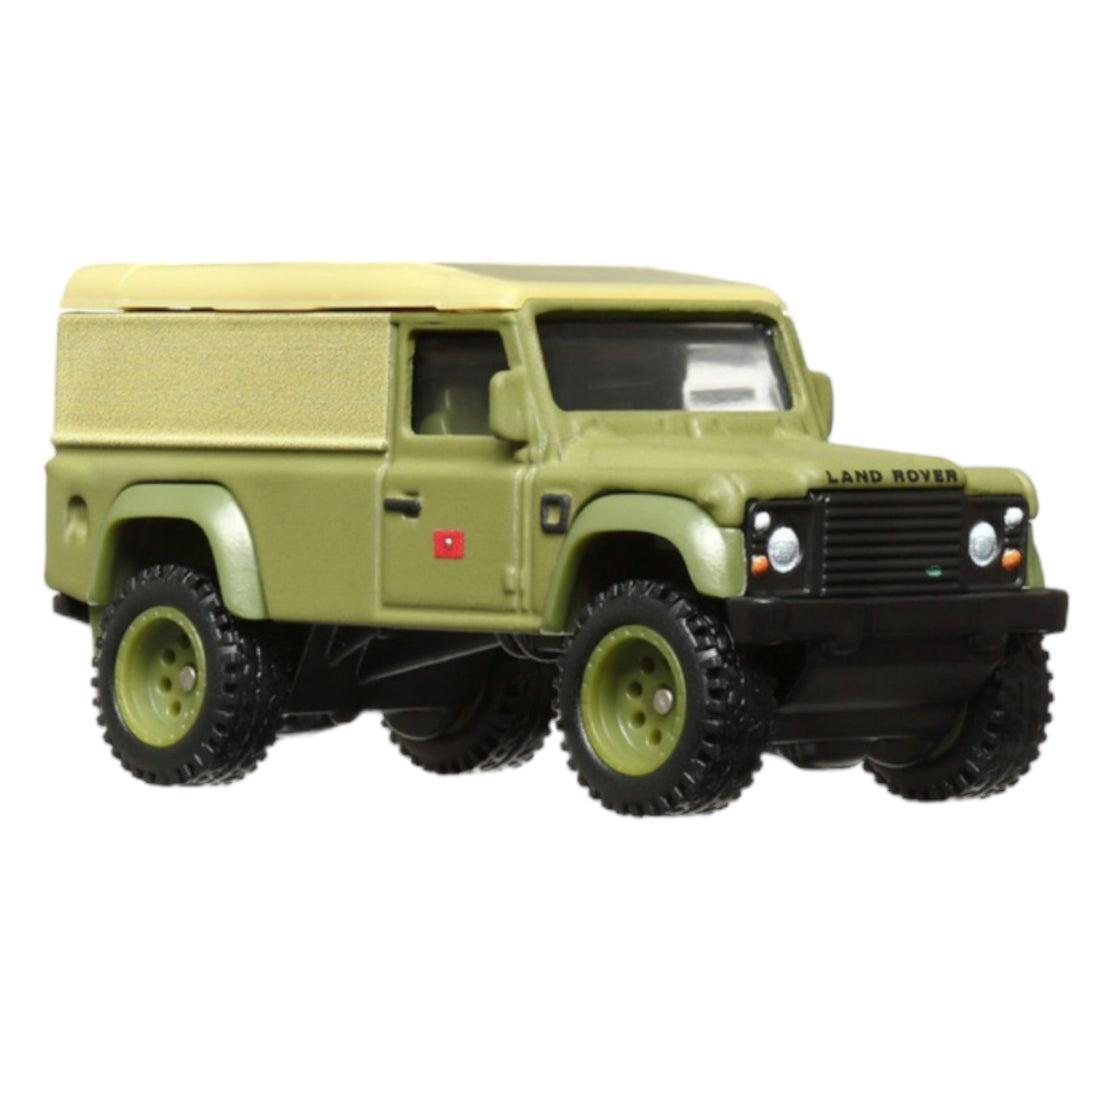 Hot Wheels Fast & Furious Land Rover Defender 110 Figure